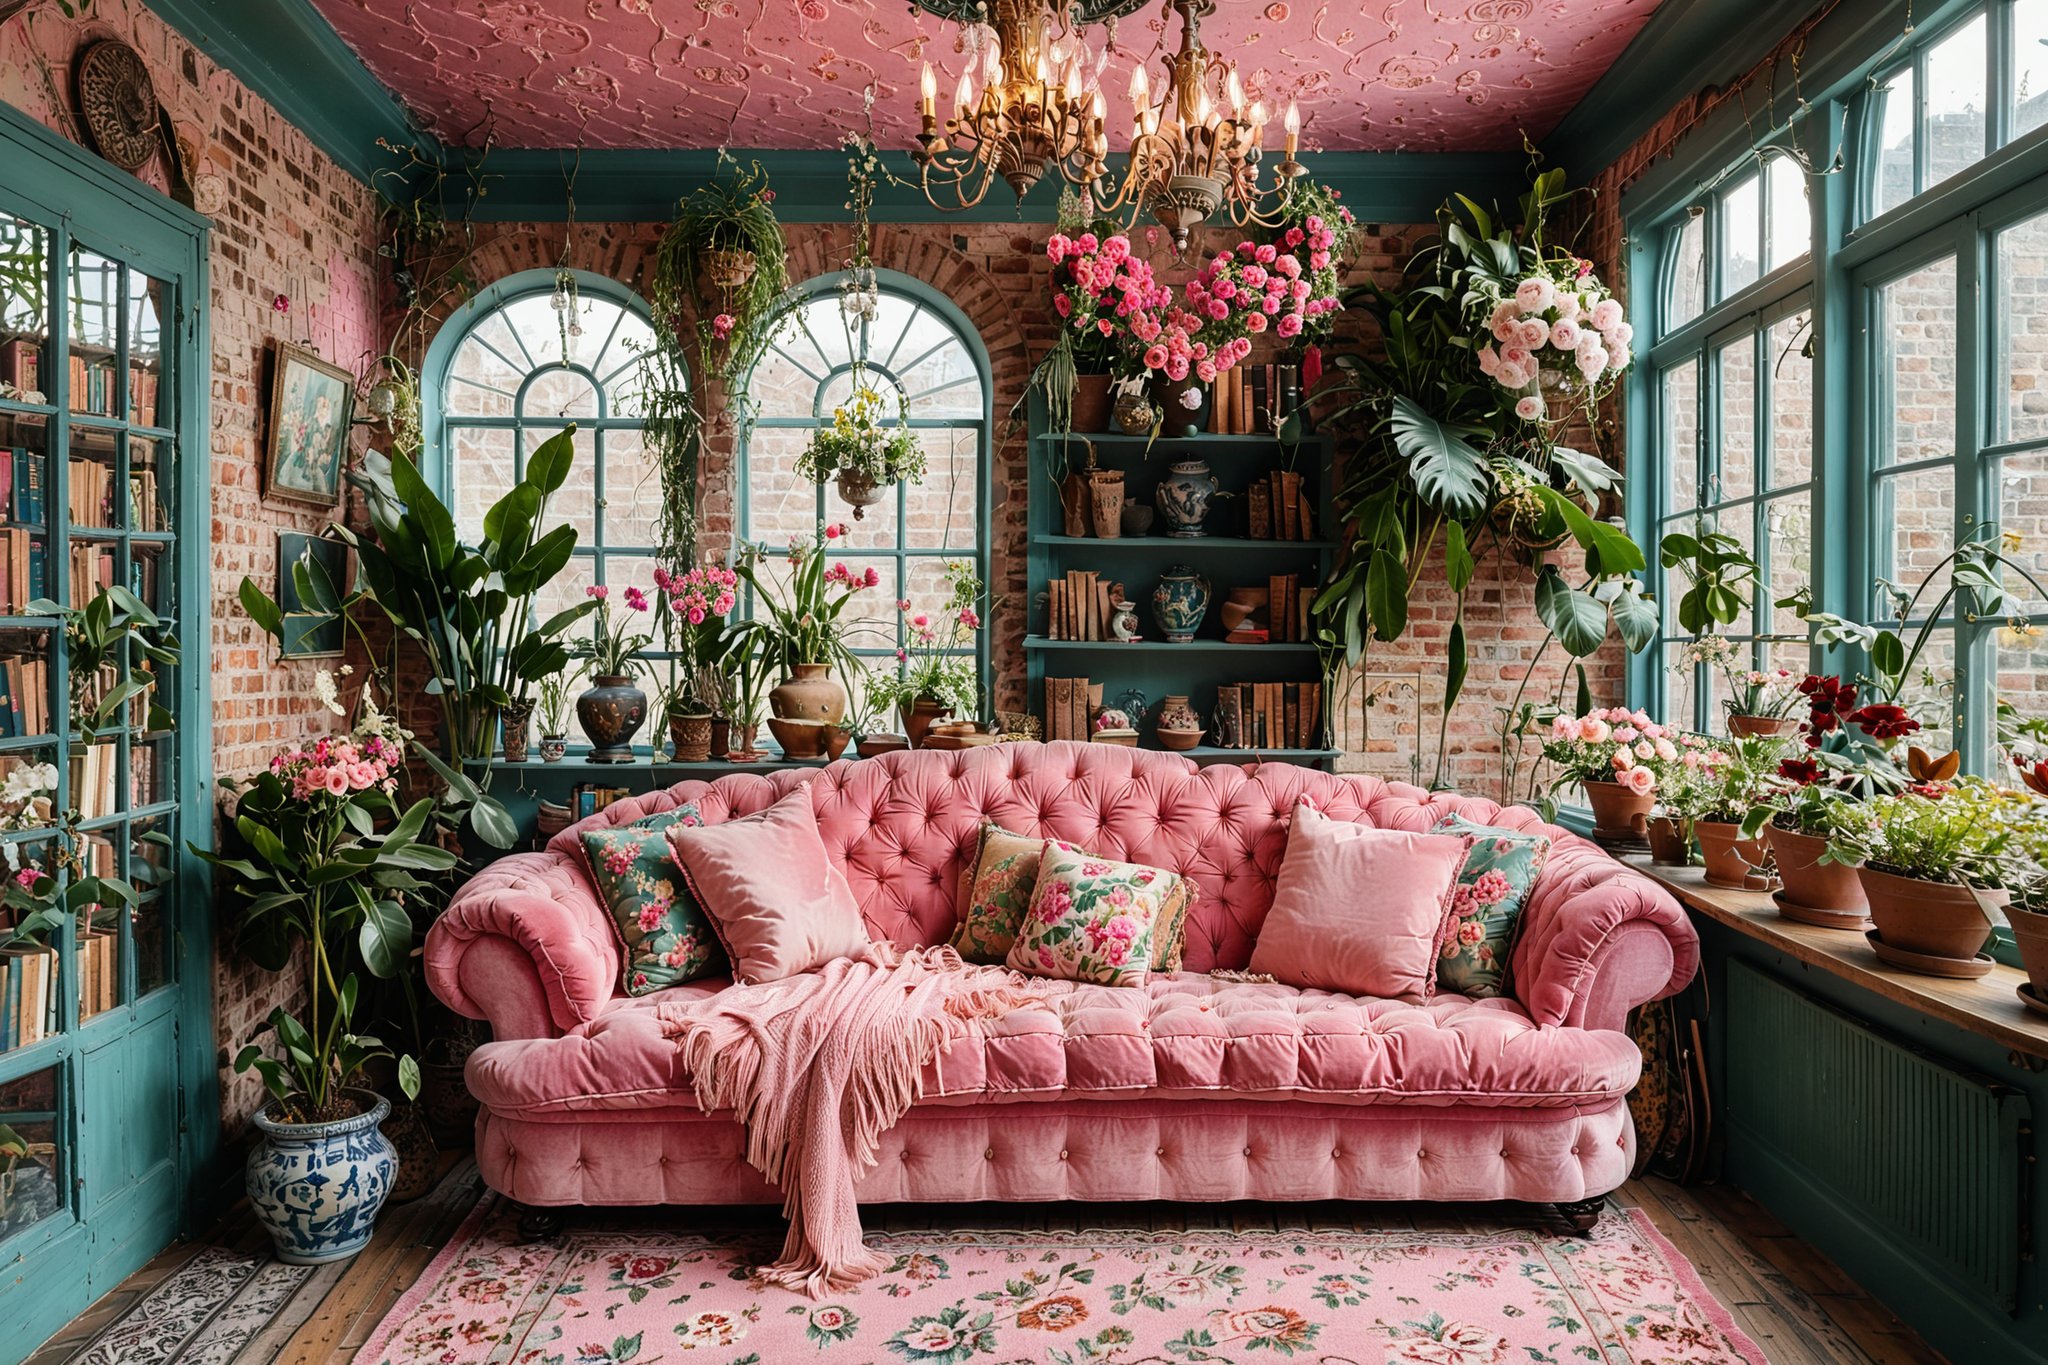 A cozy indoor space, possibly a conservatory or a sunroom. The room is adorned with a pink tufted sofa, floral cushions, and a variety of potted plants. Above the sofa hangs a unique pink chandelier. The walls are decorated with floral wallpapers and vintage framed artworks. A glass ceiling allows sunlight to pour in, illuminating the space. To the left, there's a wooden shelf with books and decorative items, and to the right, a window overlooks a brick building. The floor is covered with a patterned rug, and a small wooden table with a vase of flowers is placed near the sofa.